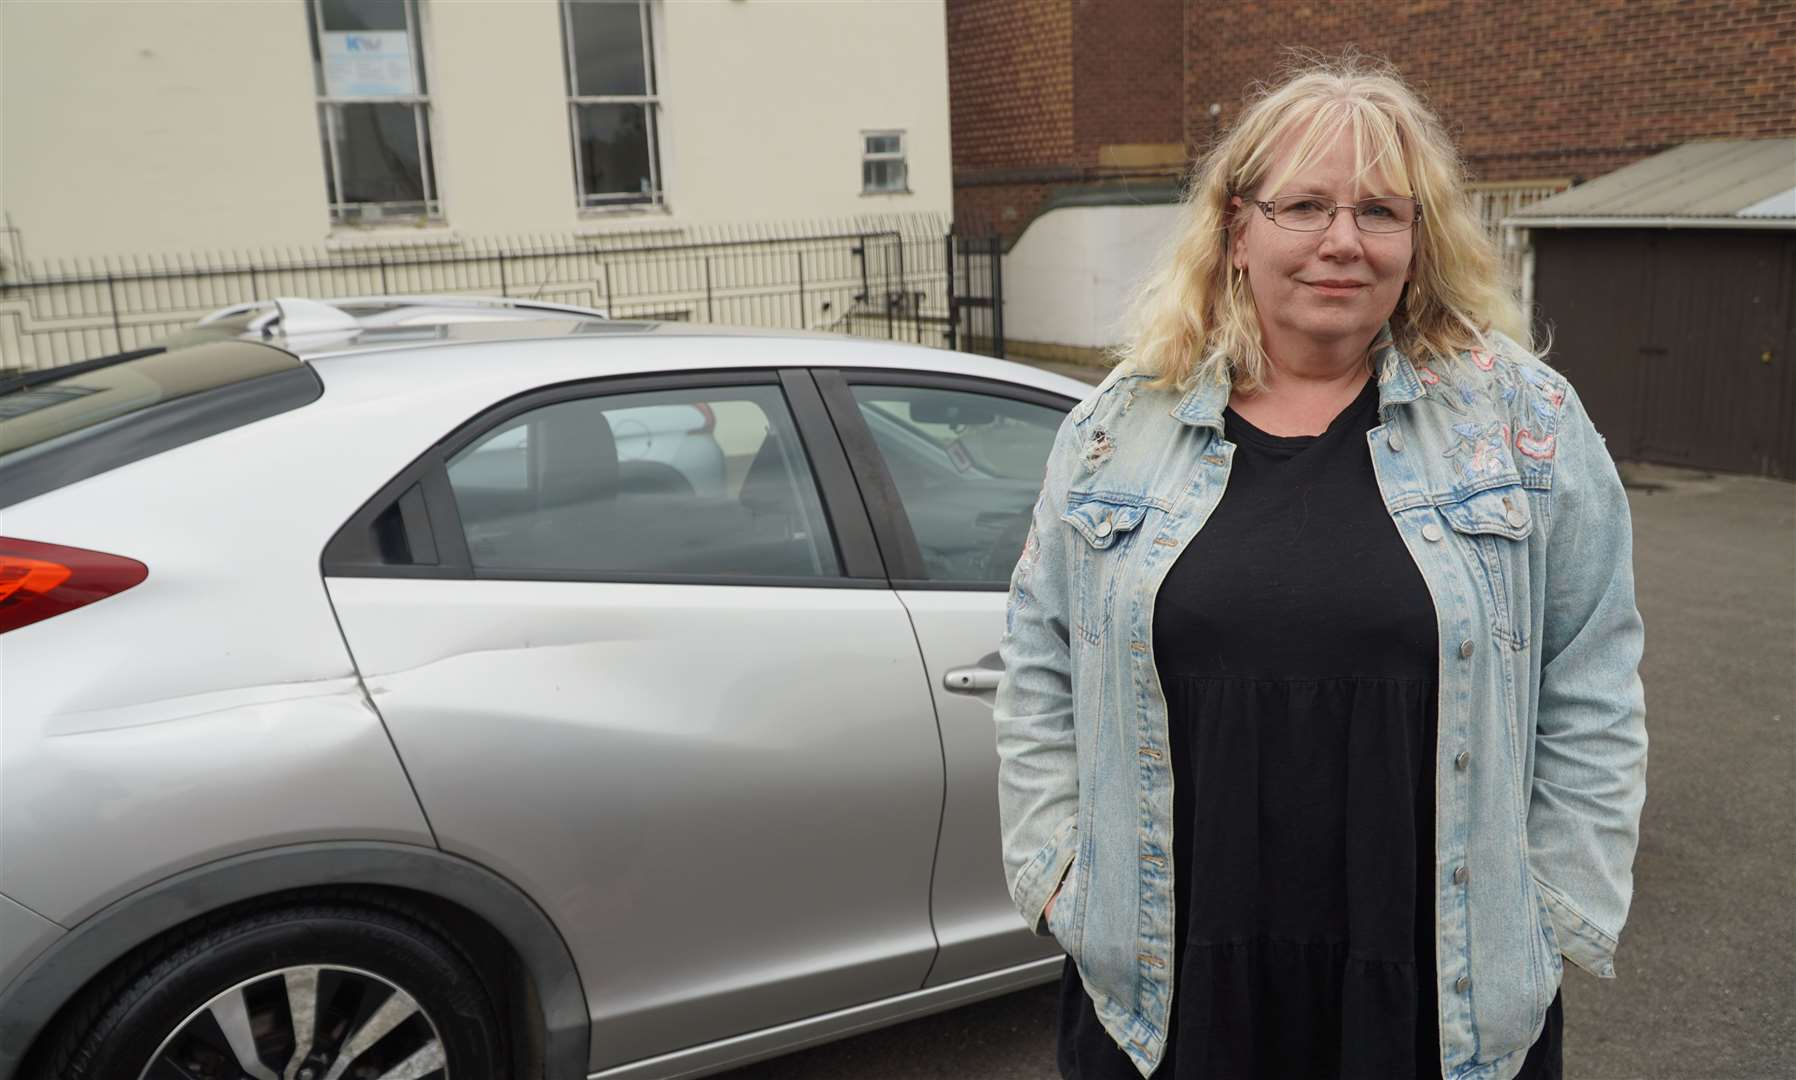 Rae Bottomley of Trebble Road, Swanscombe, with her damaged car